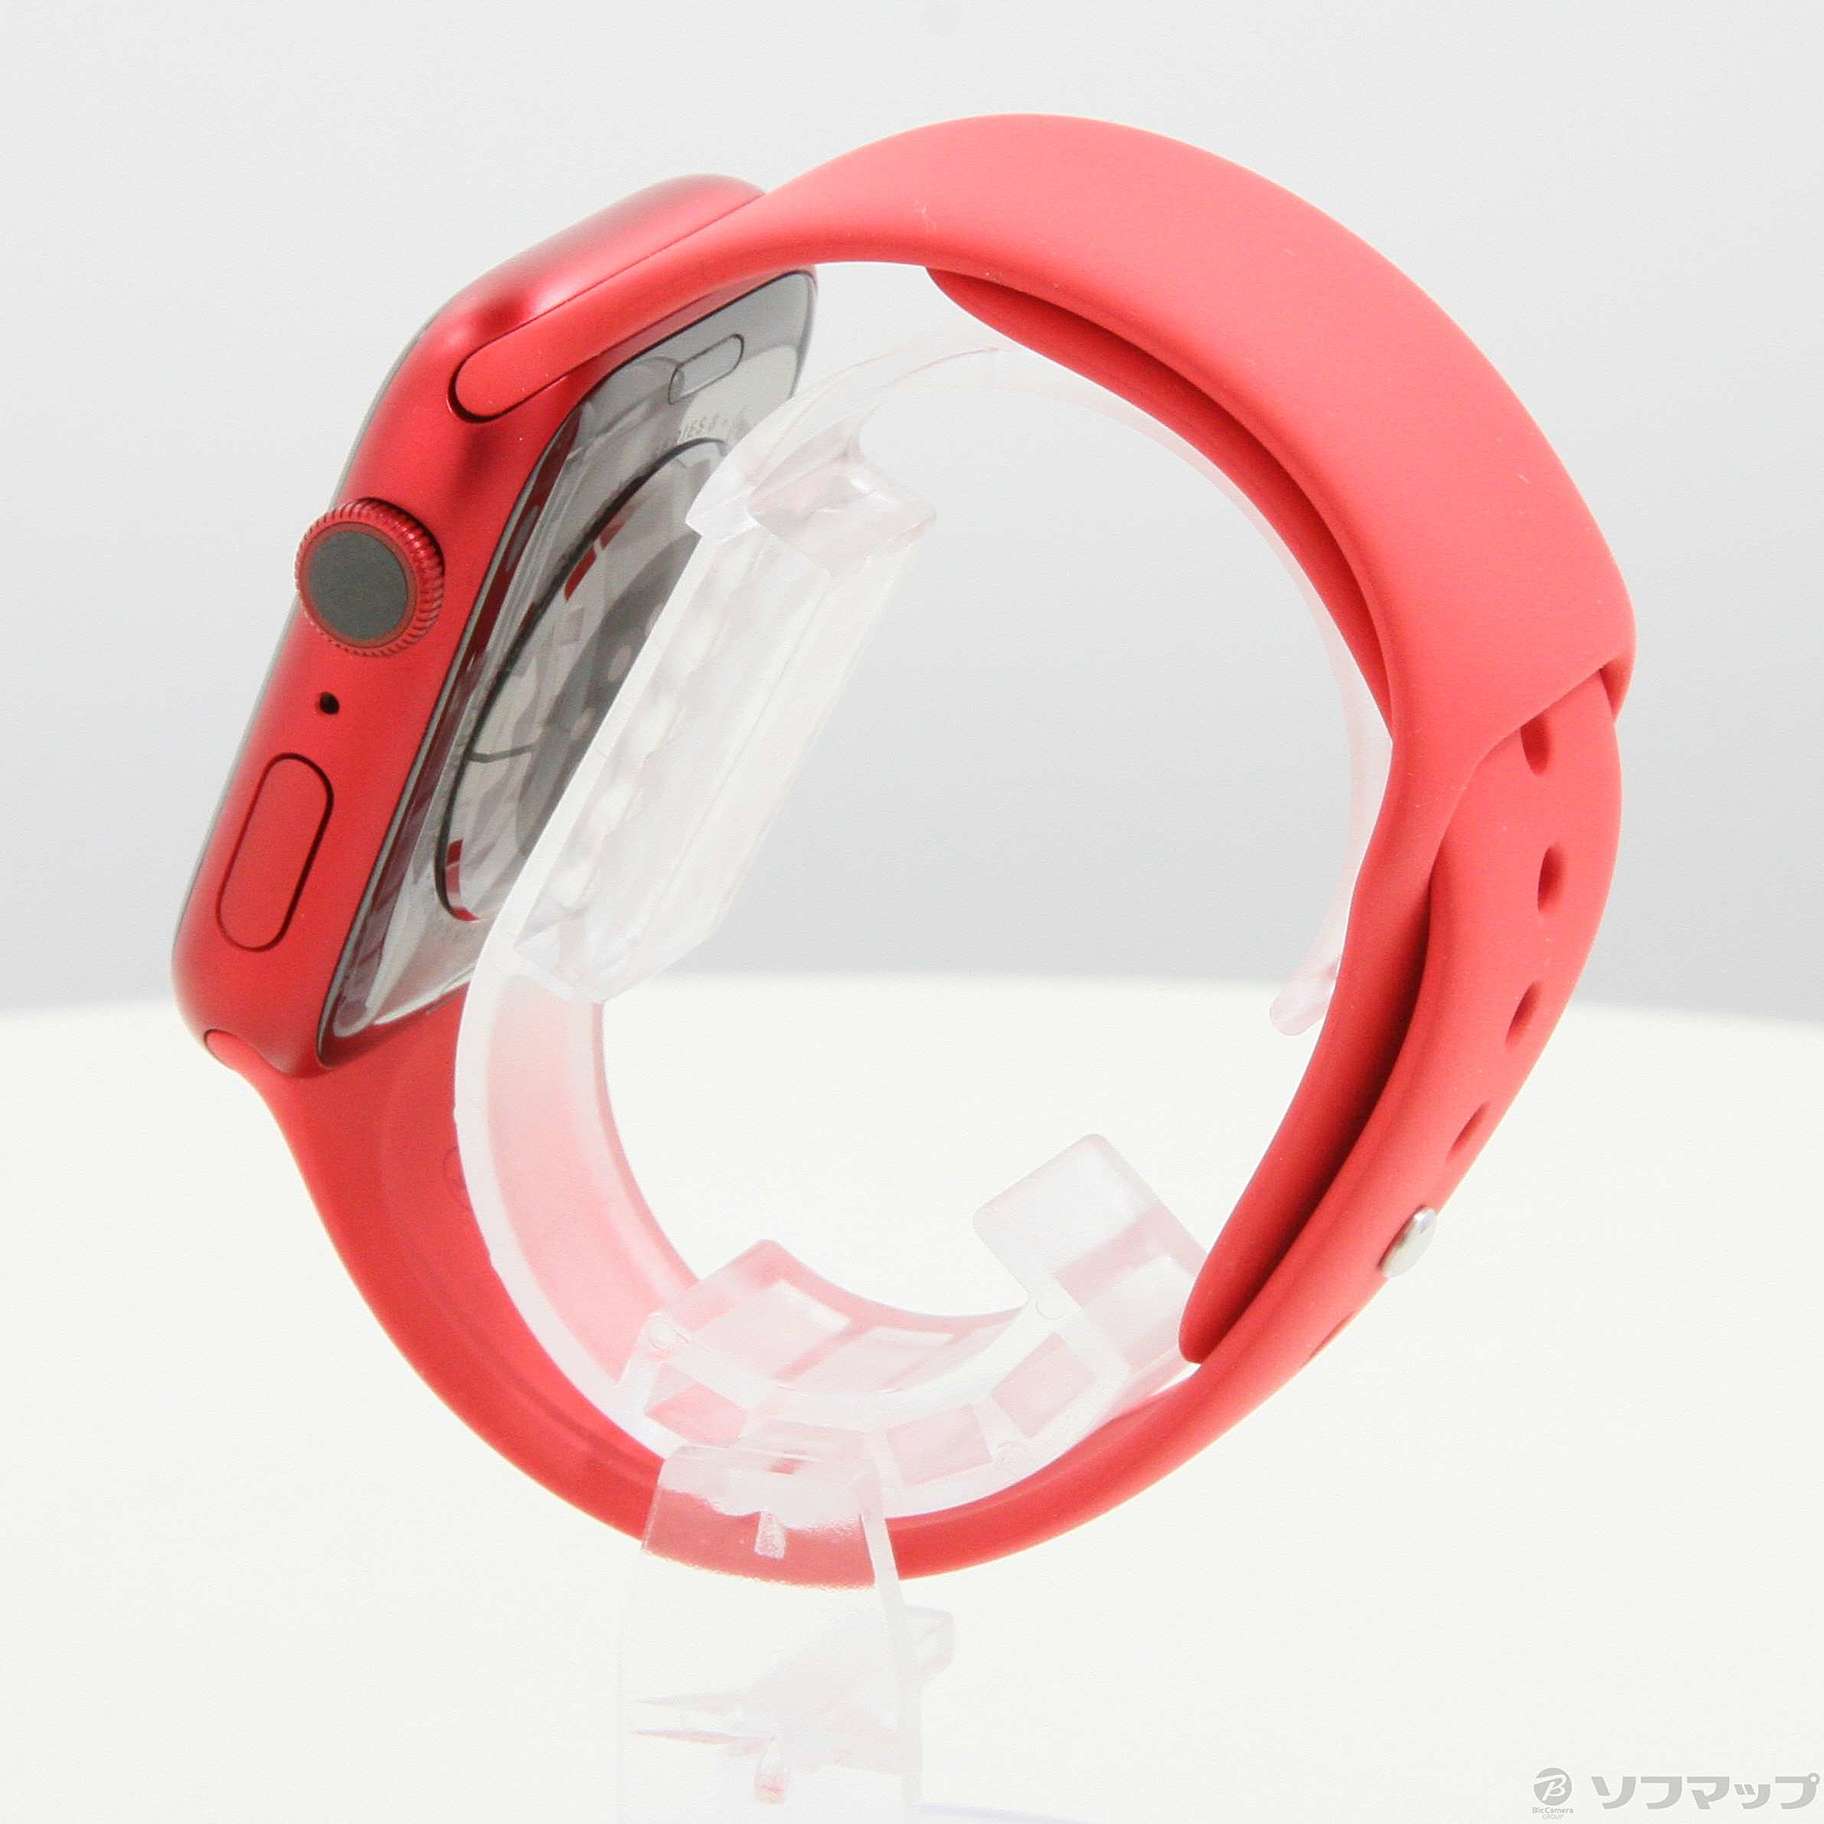 Apple Watch Series 8 GPS 45mm PRODUCTRED